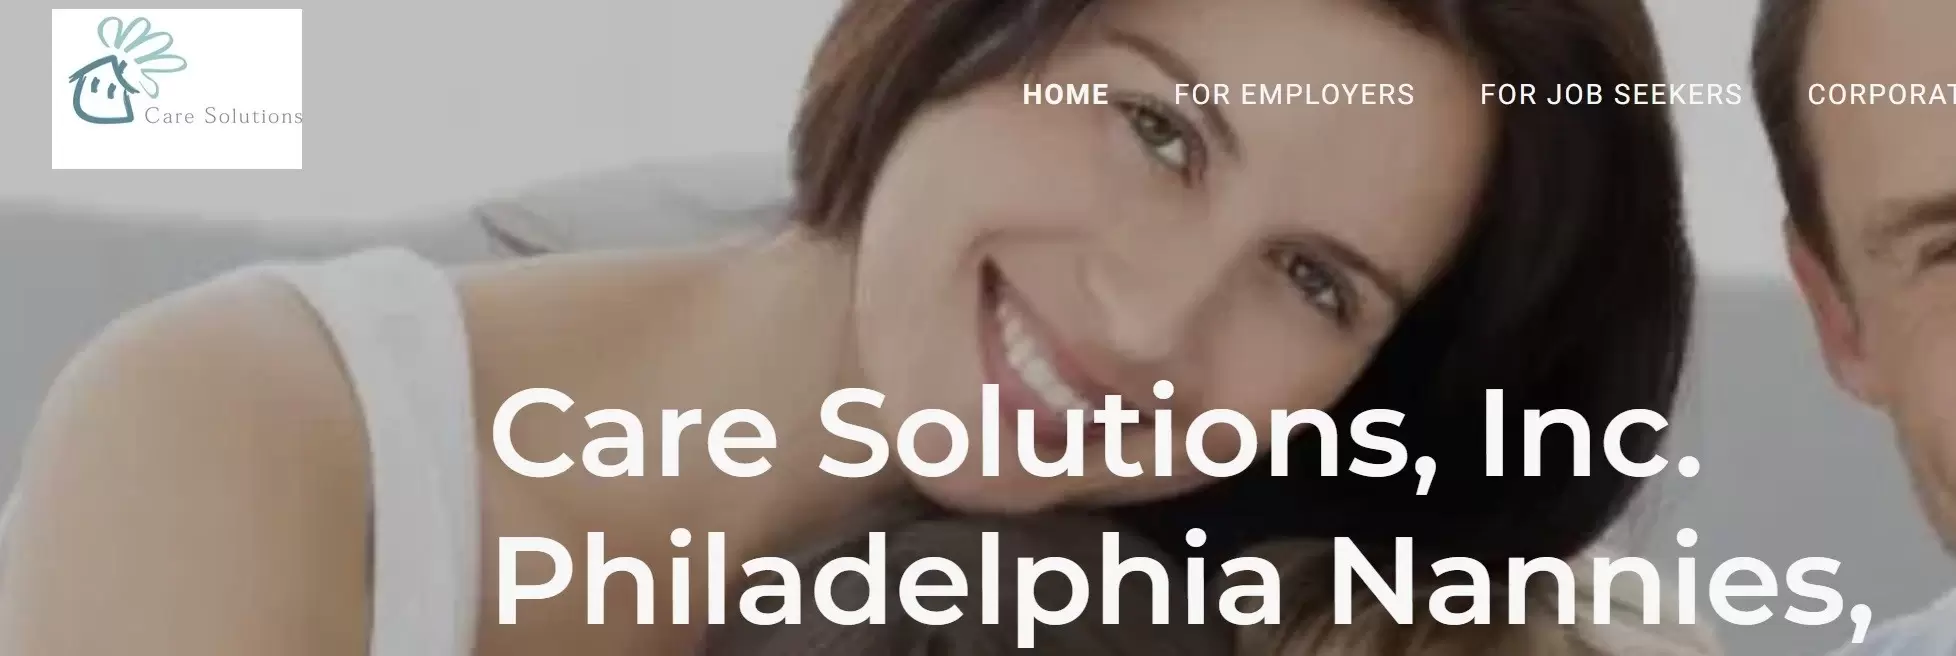 Care Solutions Inc company profile and reviews